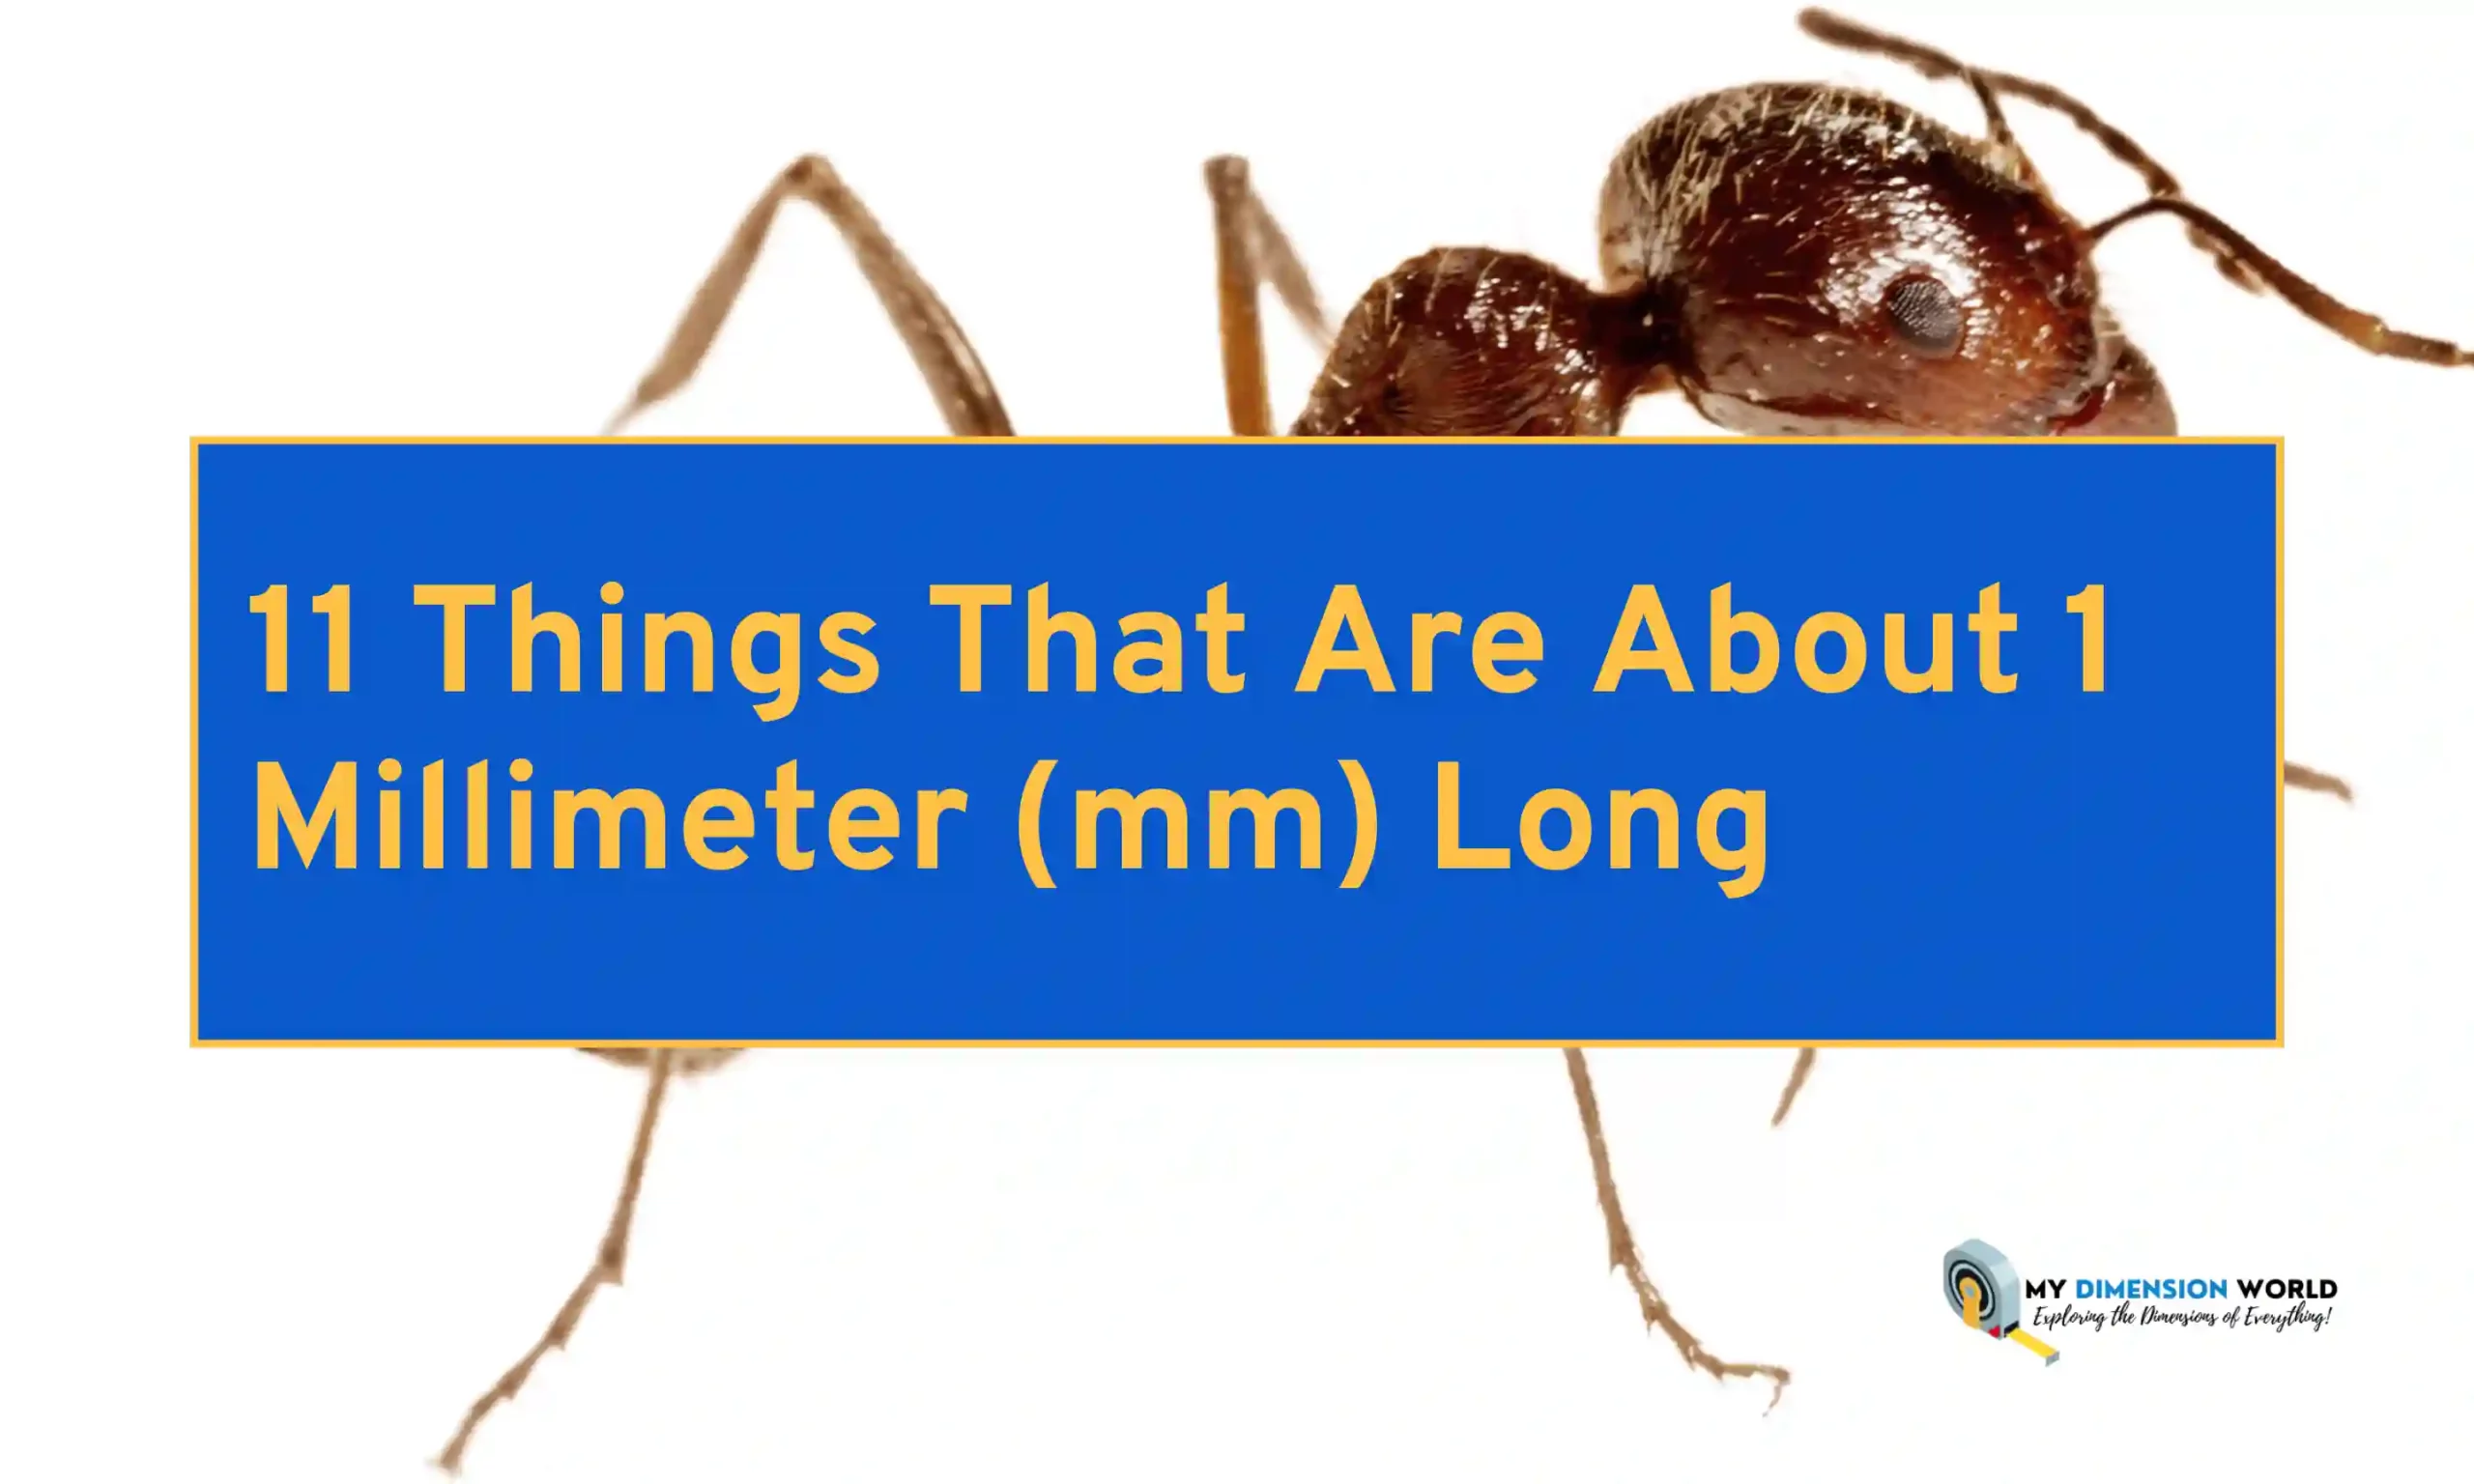 11 Things That Are About 1 Millimeter (mm) Long